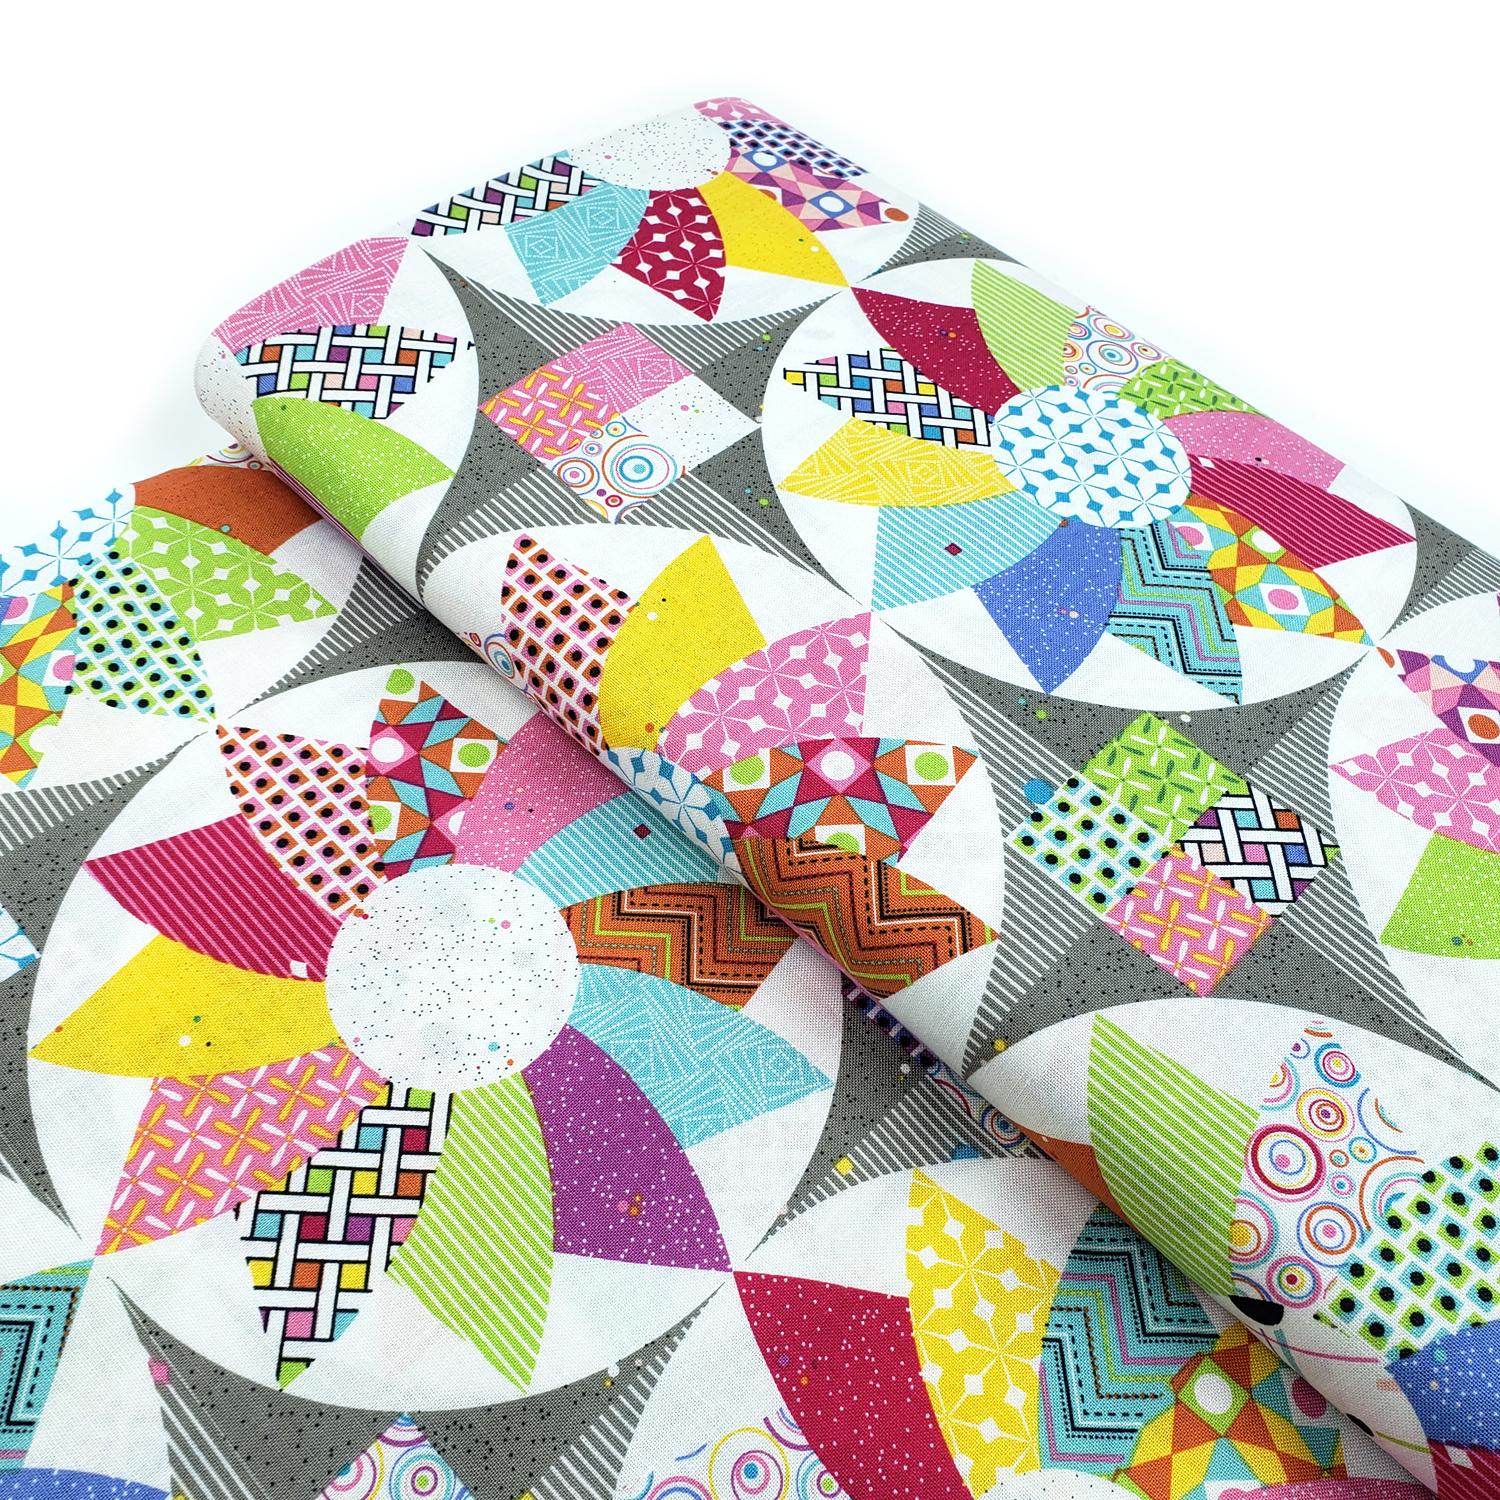 riley blake,colour wall,color,cheater,patchwork, sue Daley, cotton,patchwork,quilt,granny